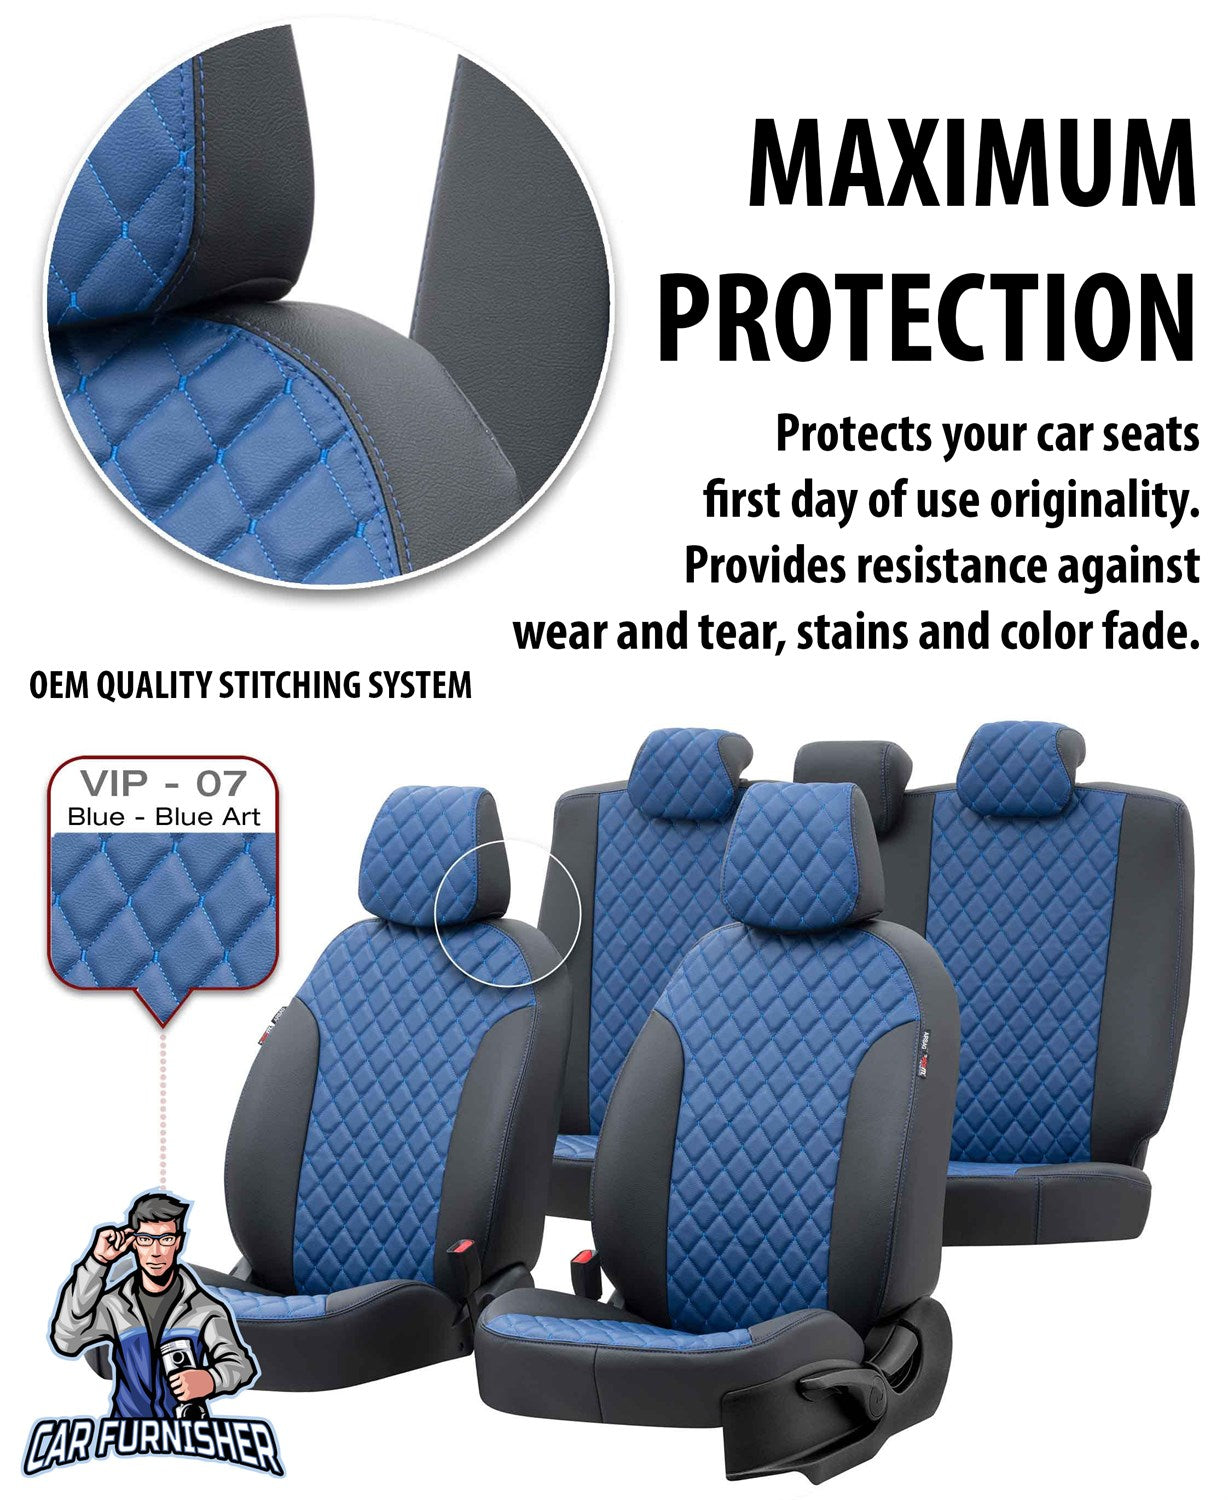 Citroen C1 Seat Covers Madrid Leather Design Blue Leather